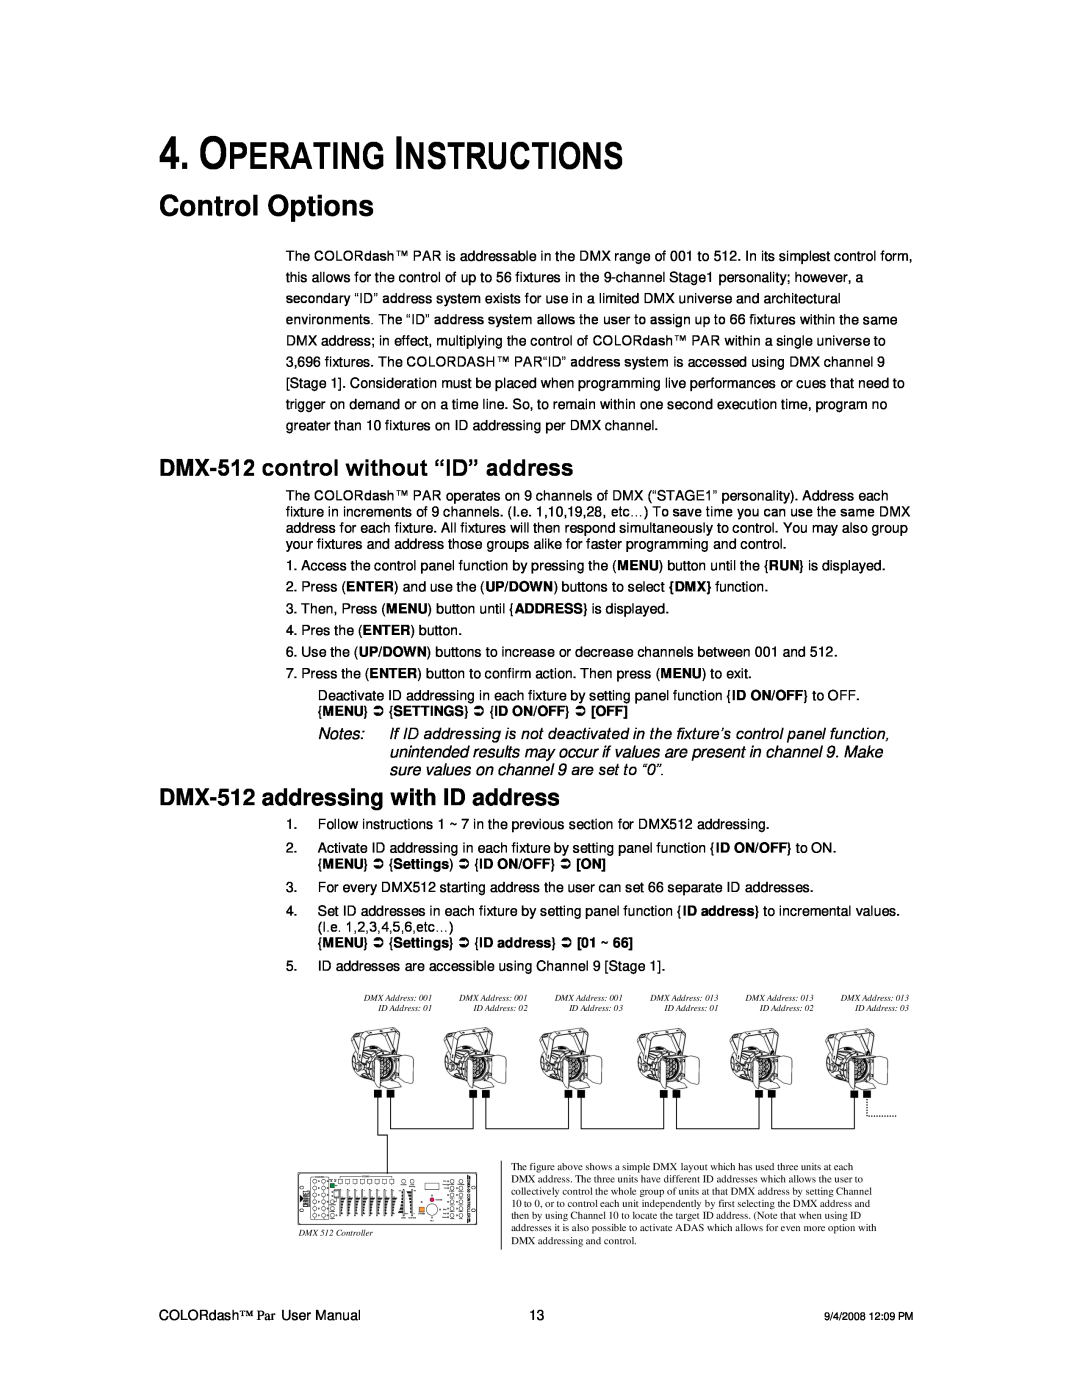 Chauvet DMX512 user manual Operating Instructions, Control Options, DMX-512control without “ID” address 